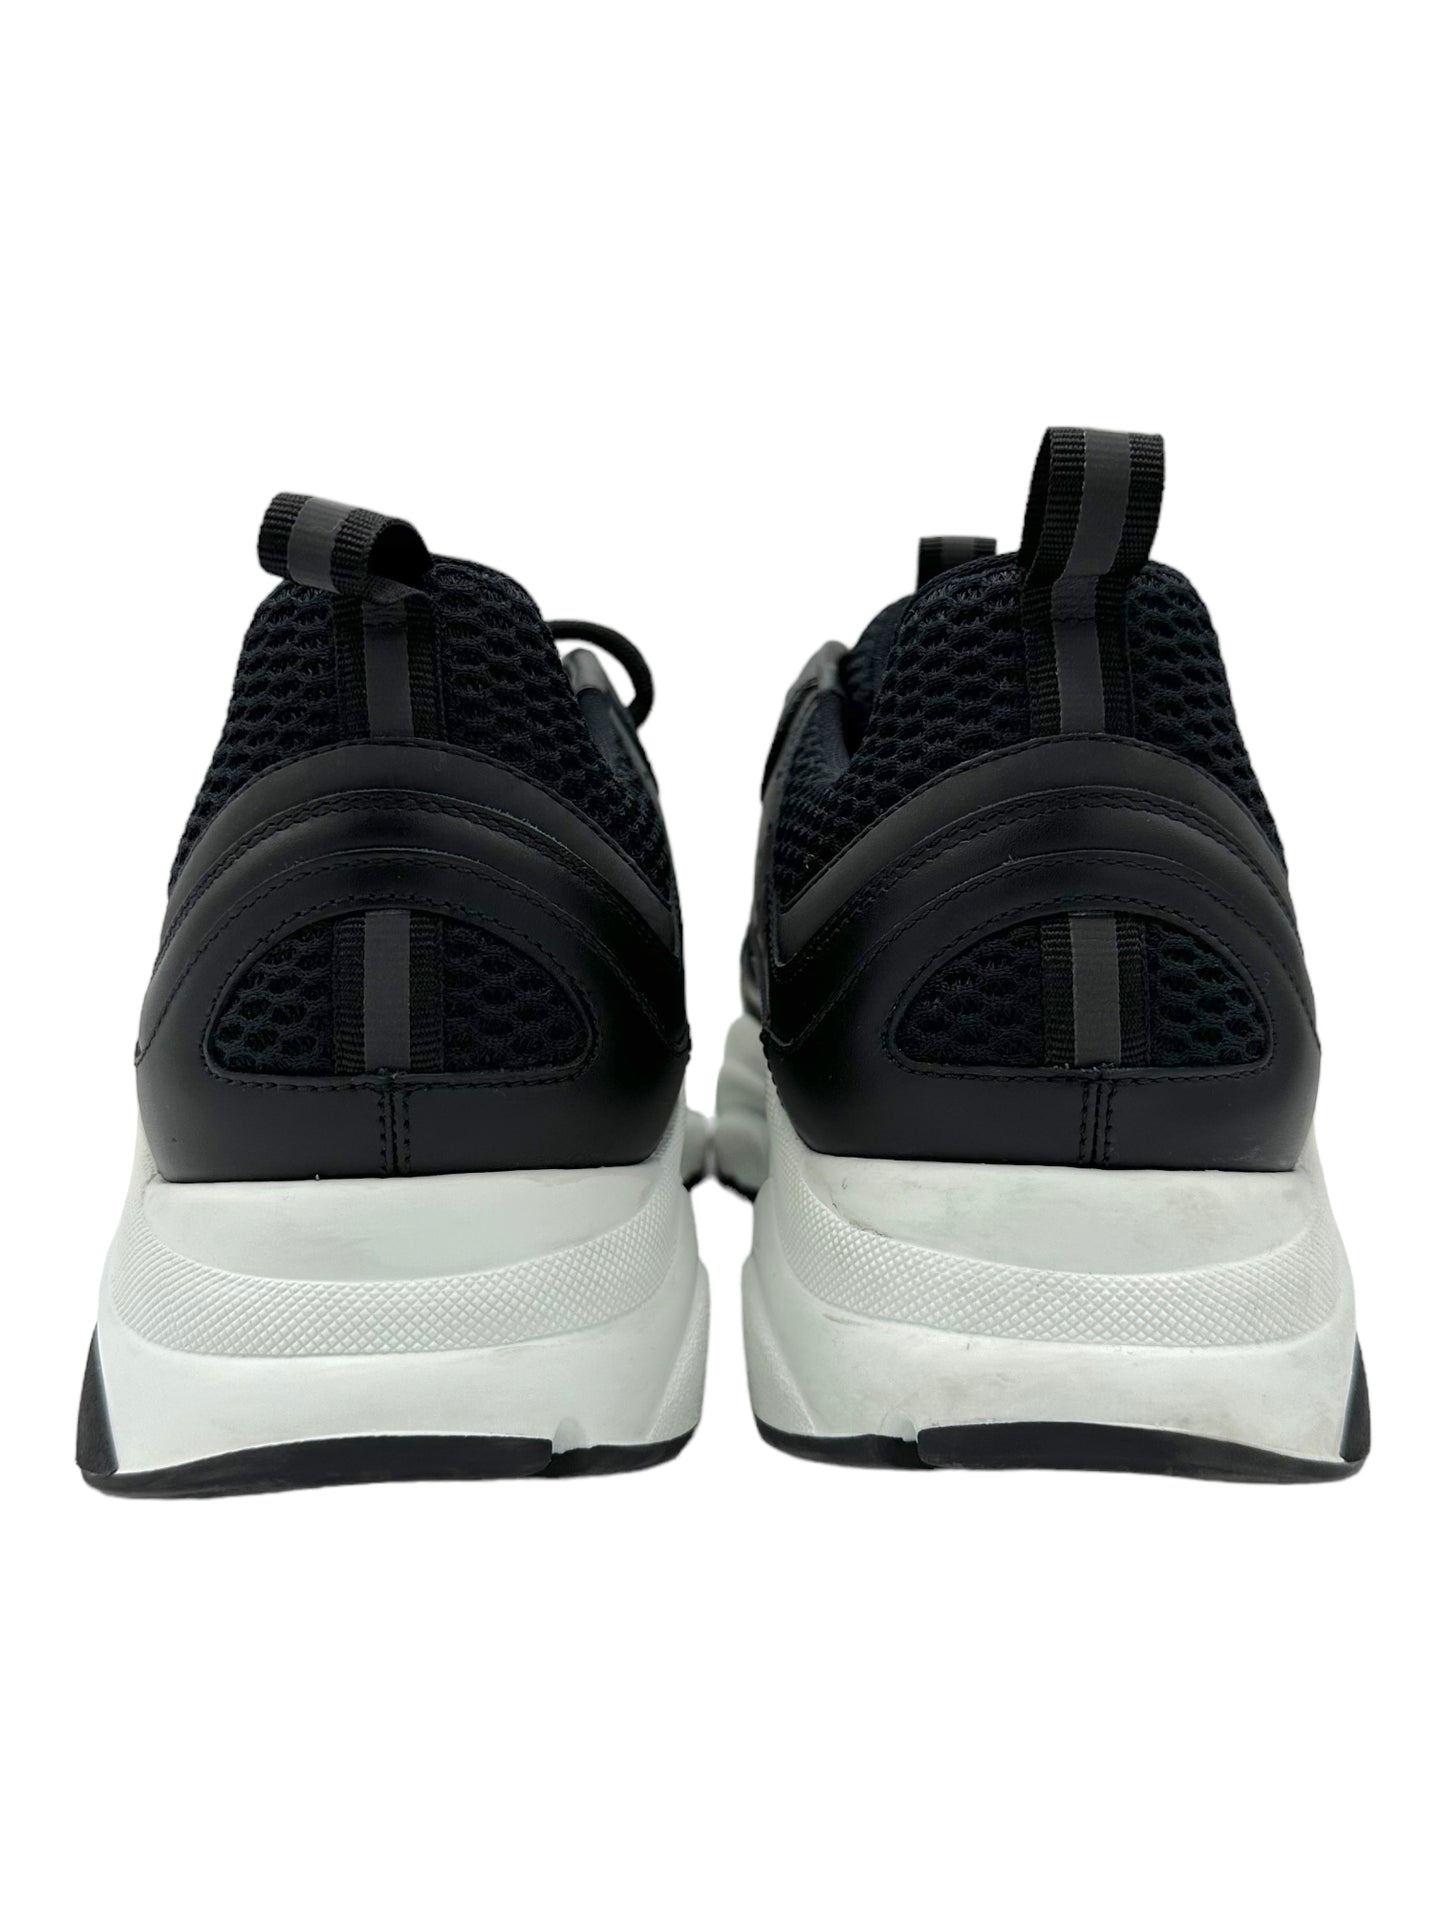 Christian Dior B22 Black & White Sneaker - Genuine Design Luxury Consignment for Men. New & Pre-Owned Clothing, Shoes, & Accessories. Calgary, Canada